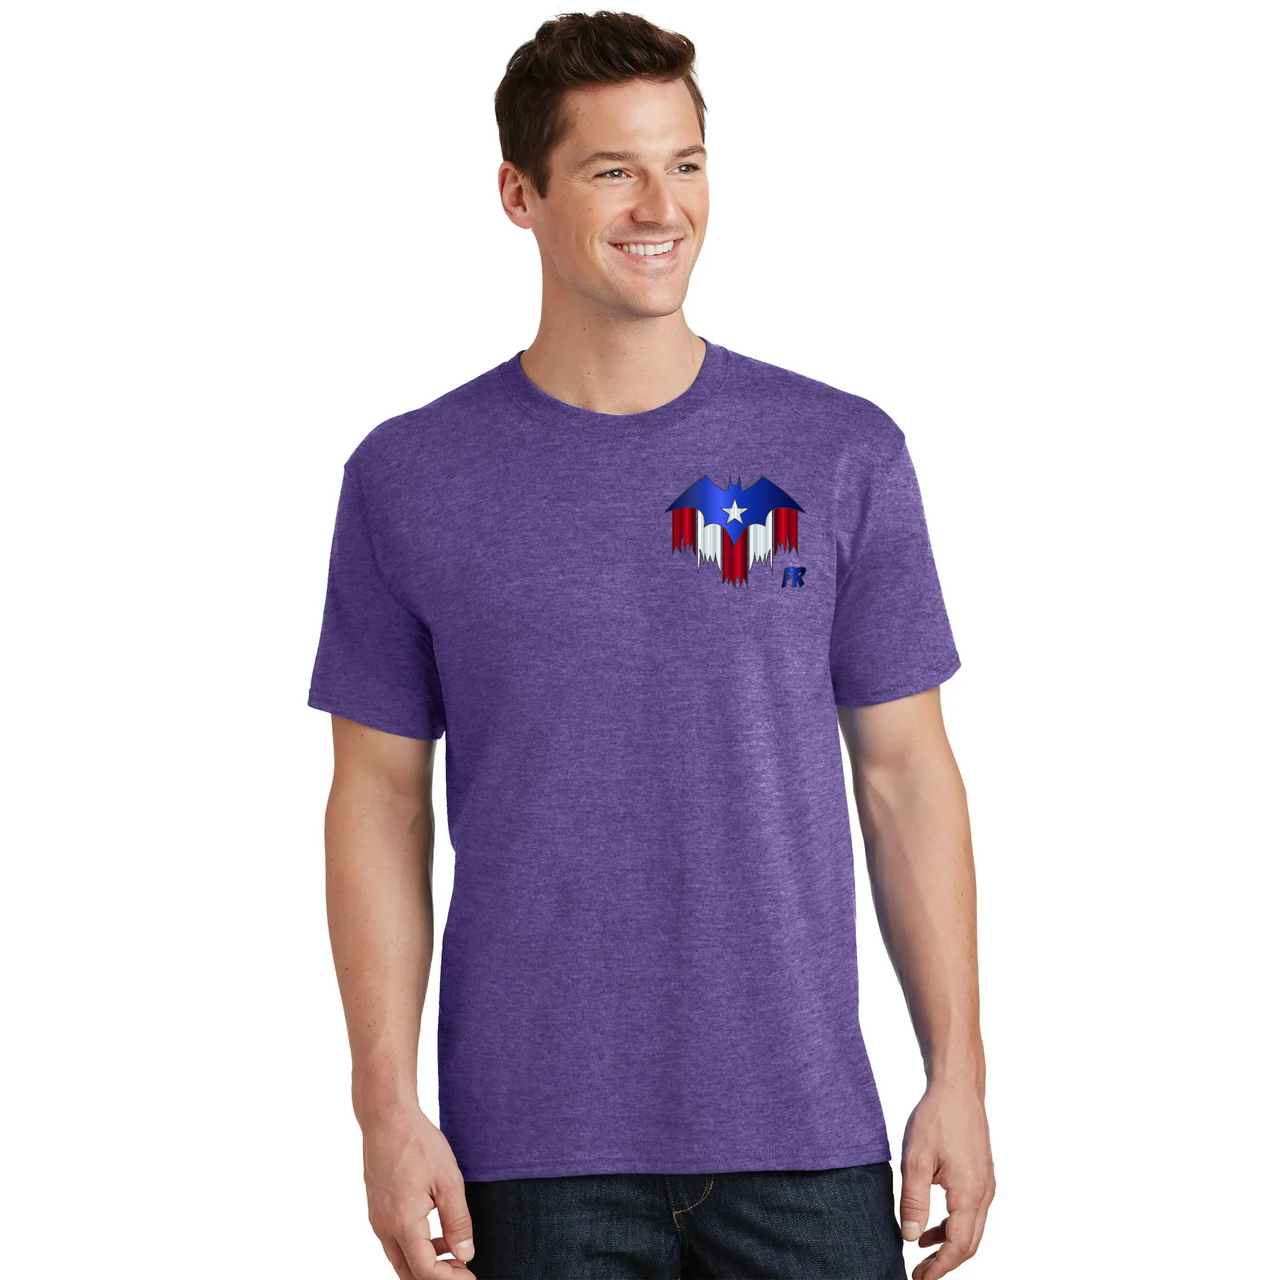 Puerto Rican Bat Man Front and Back Image Heather T-Shirt